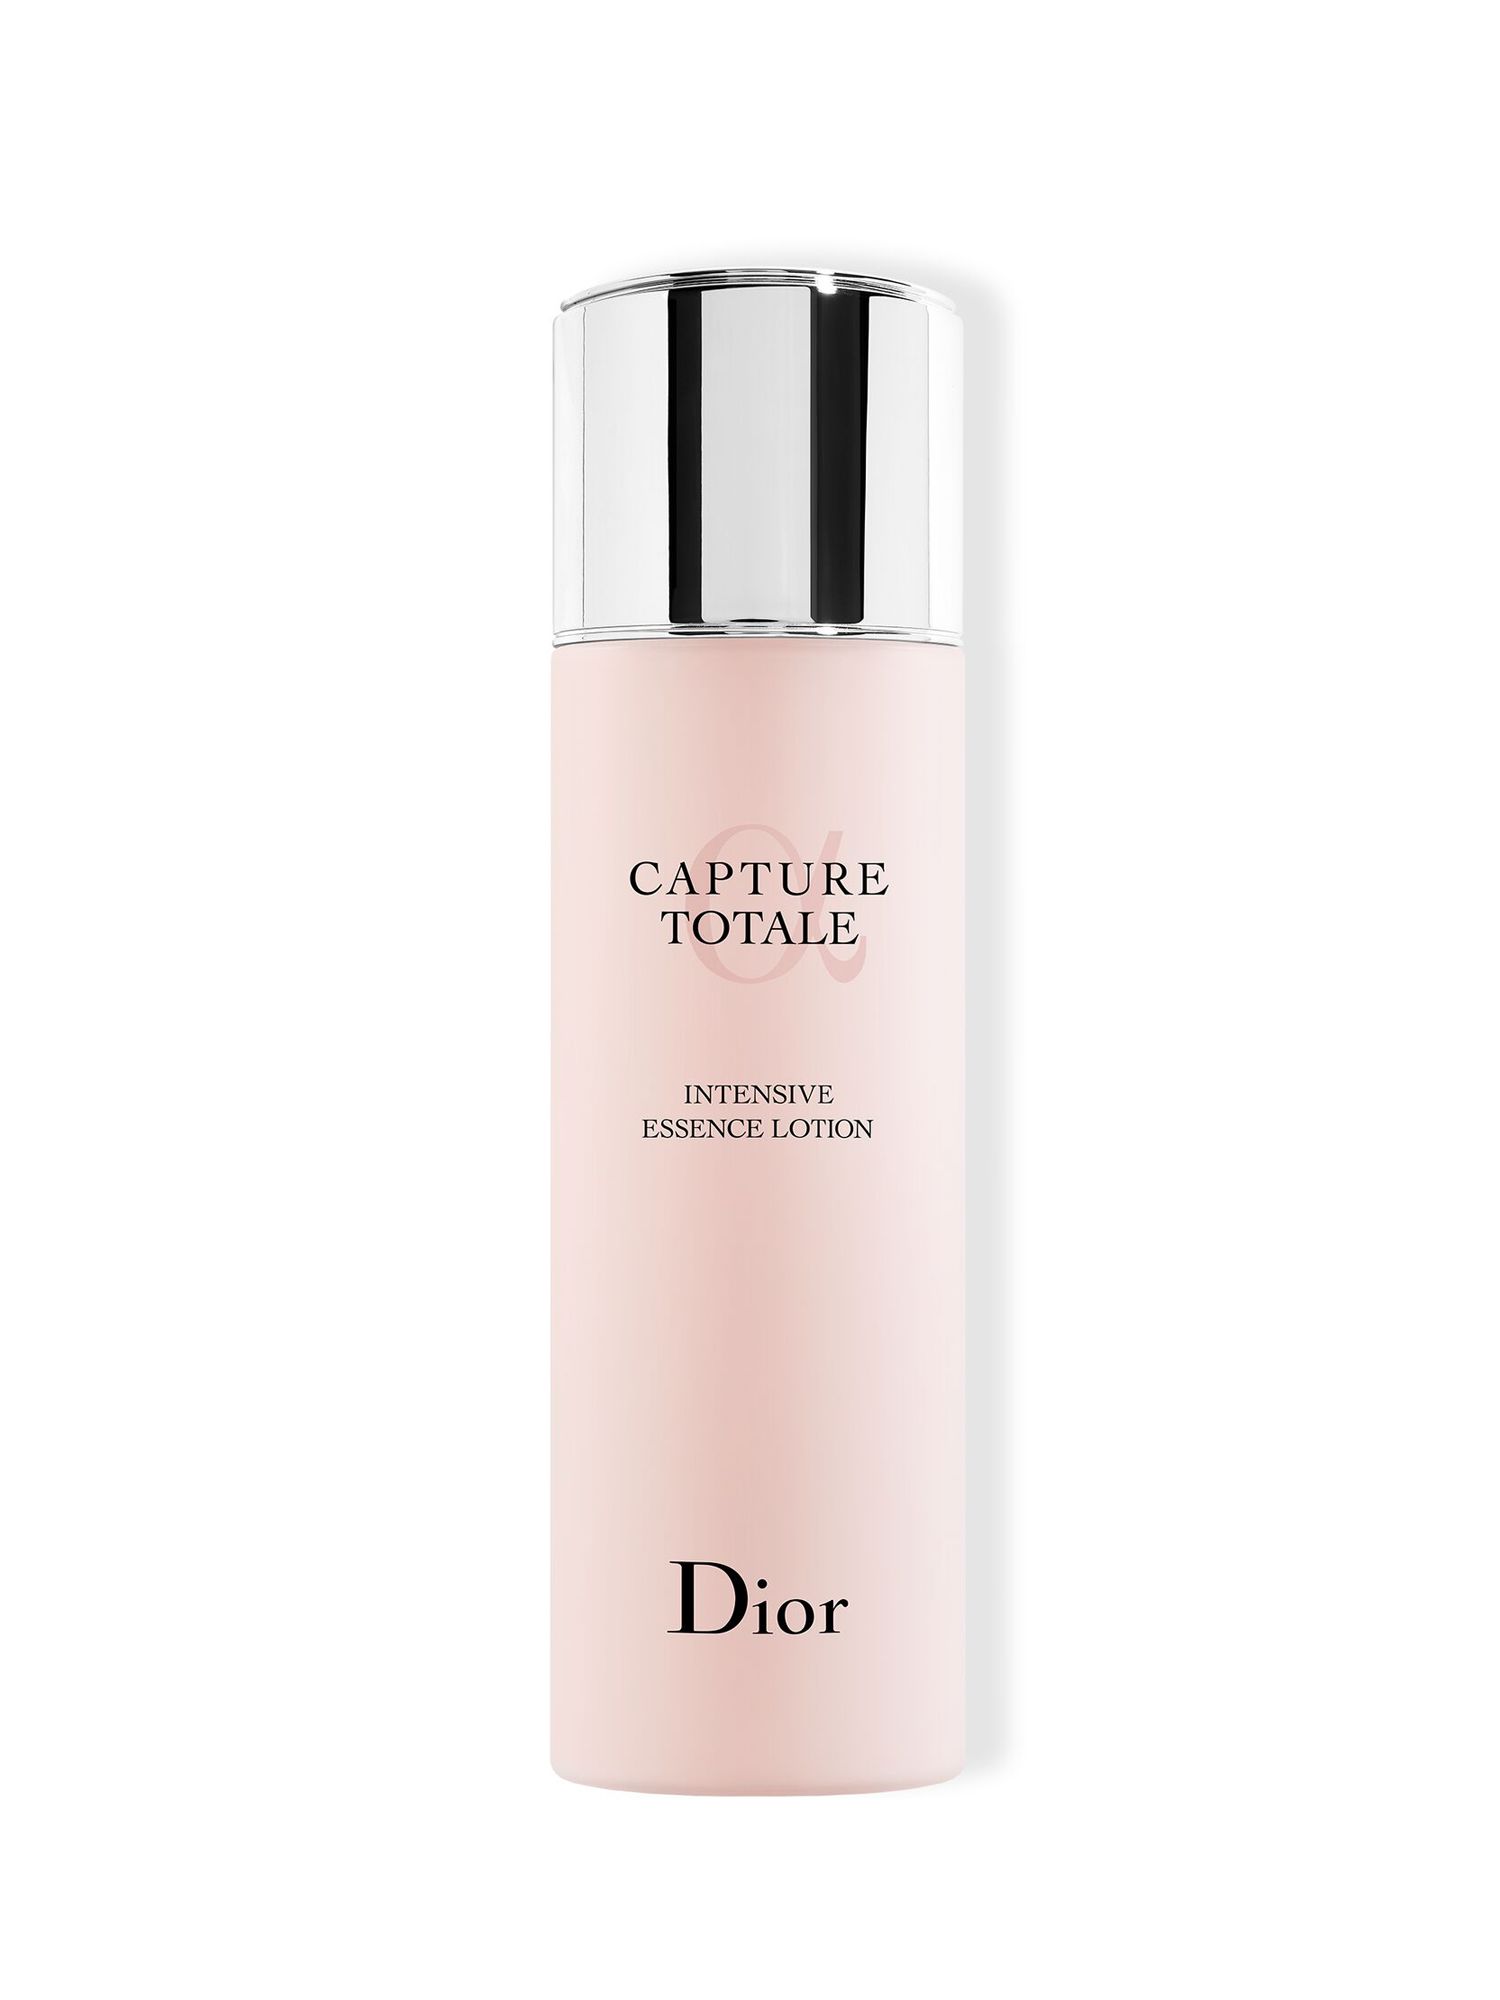 DIOR Capture Totale Intensive Essence Lotion, 50ml 1